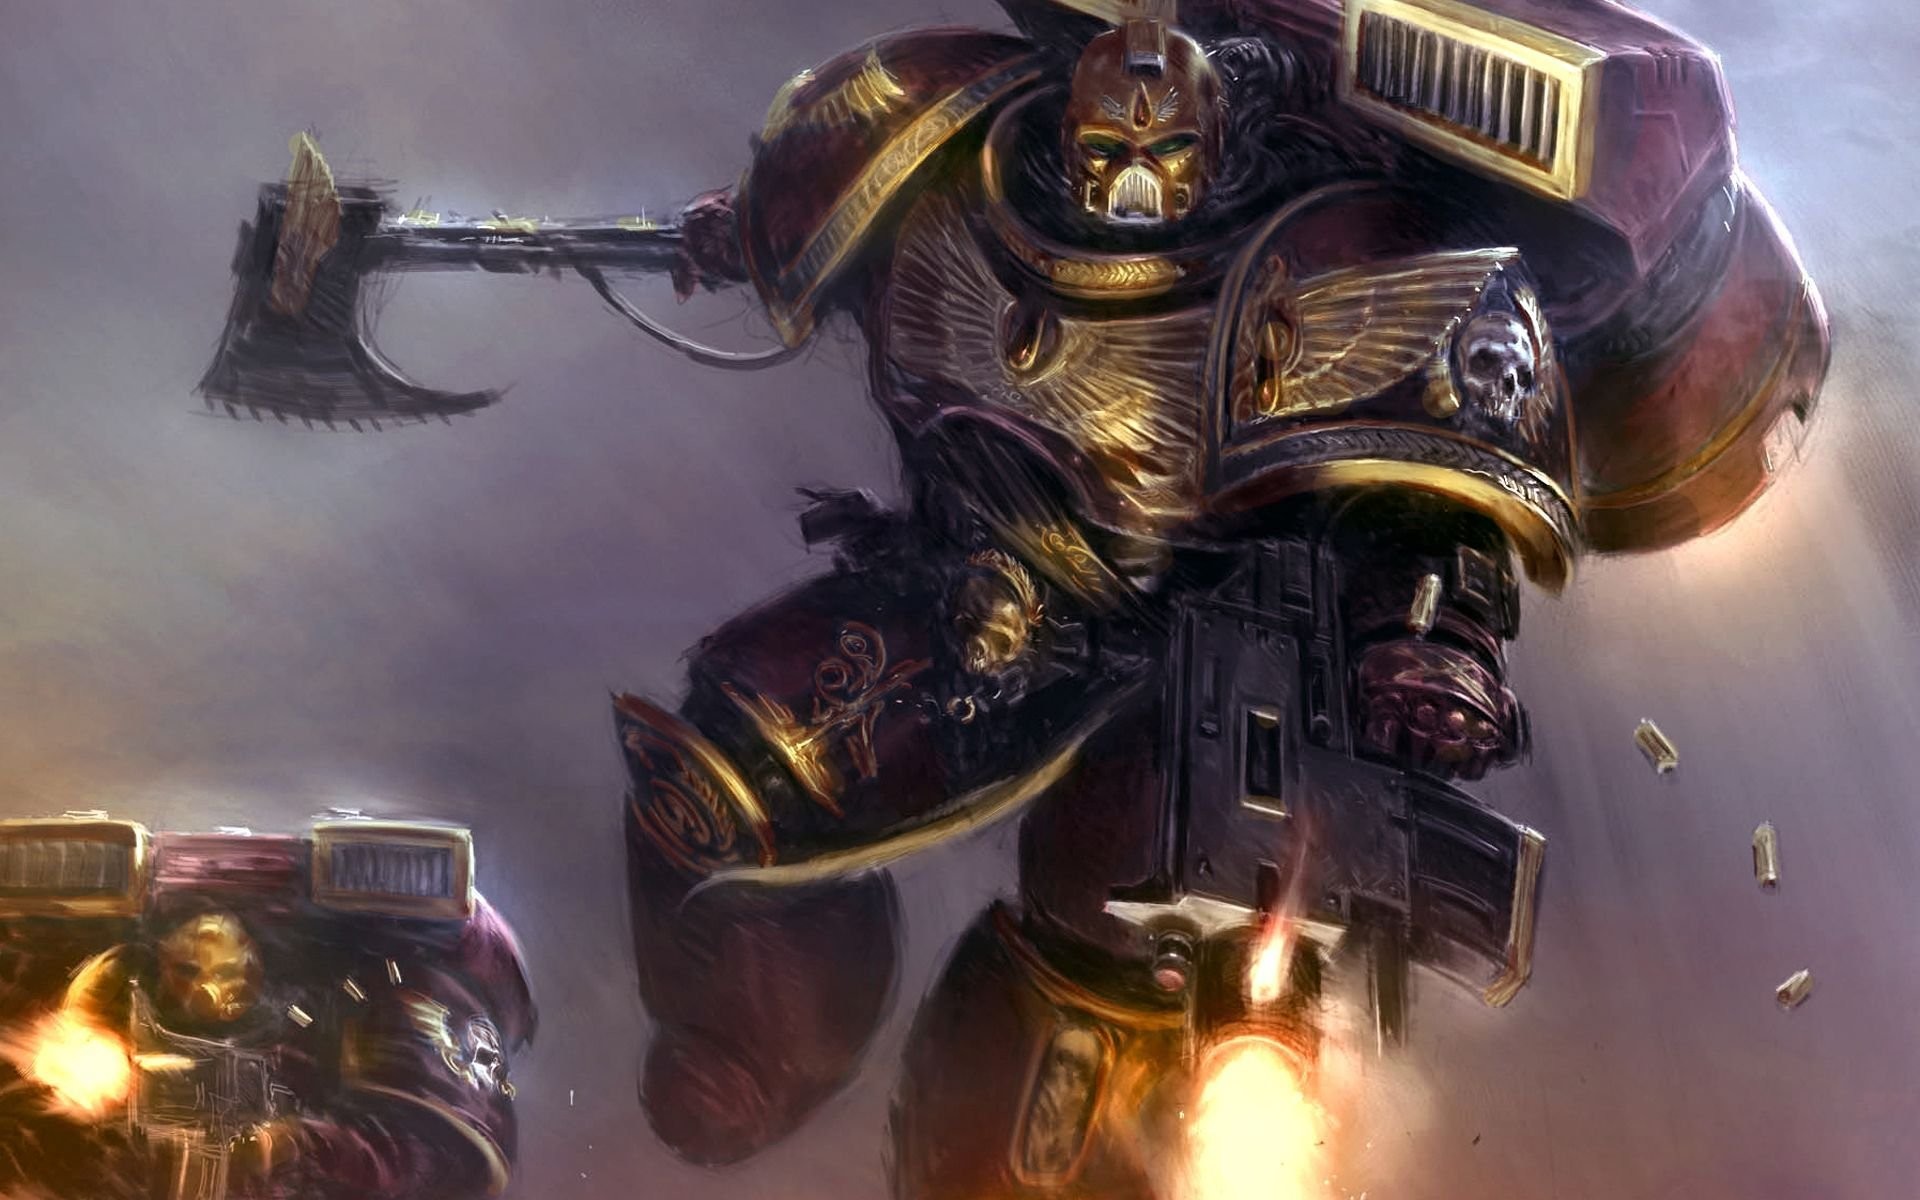 warhammer 40k wallpaper,action adventure game,games,pc game,warlord,fictional character